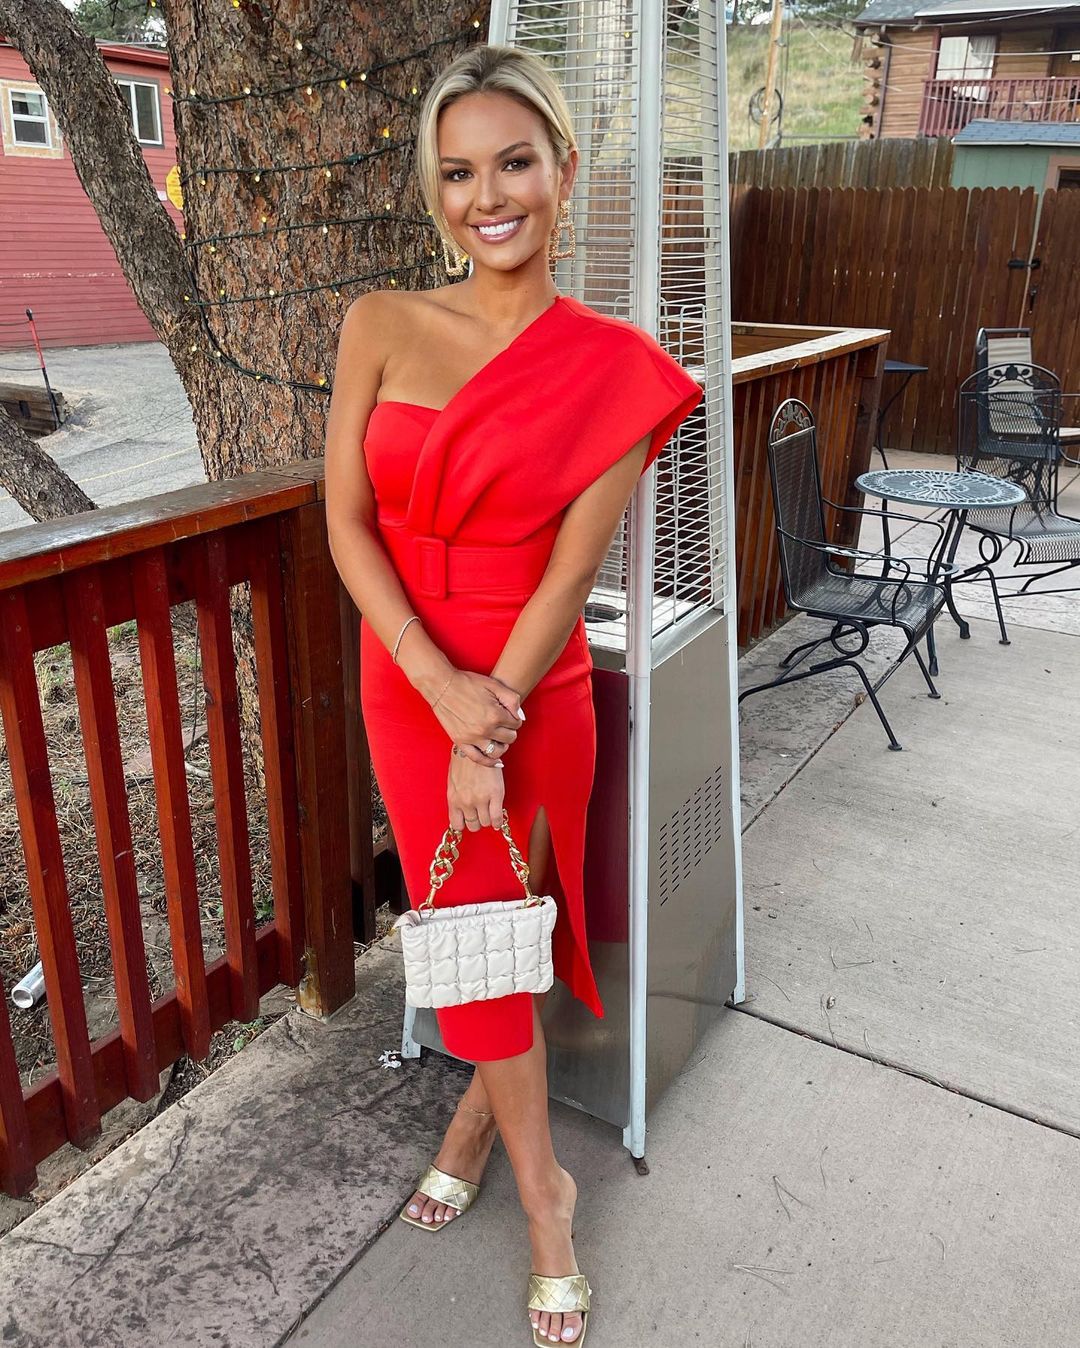 Emmy Medders in a red form-fitting dress.